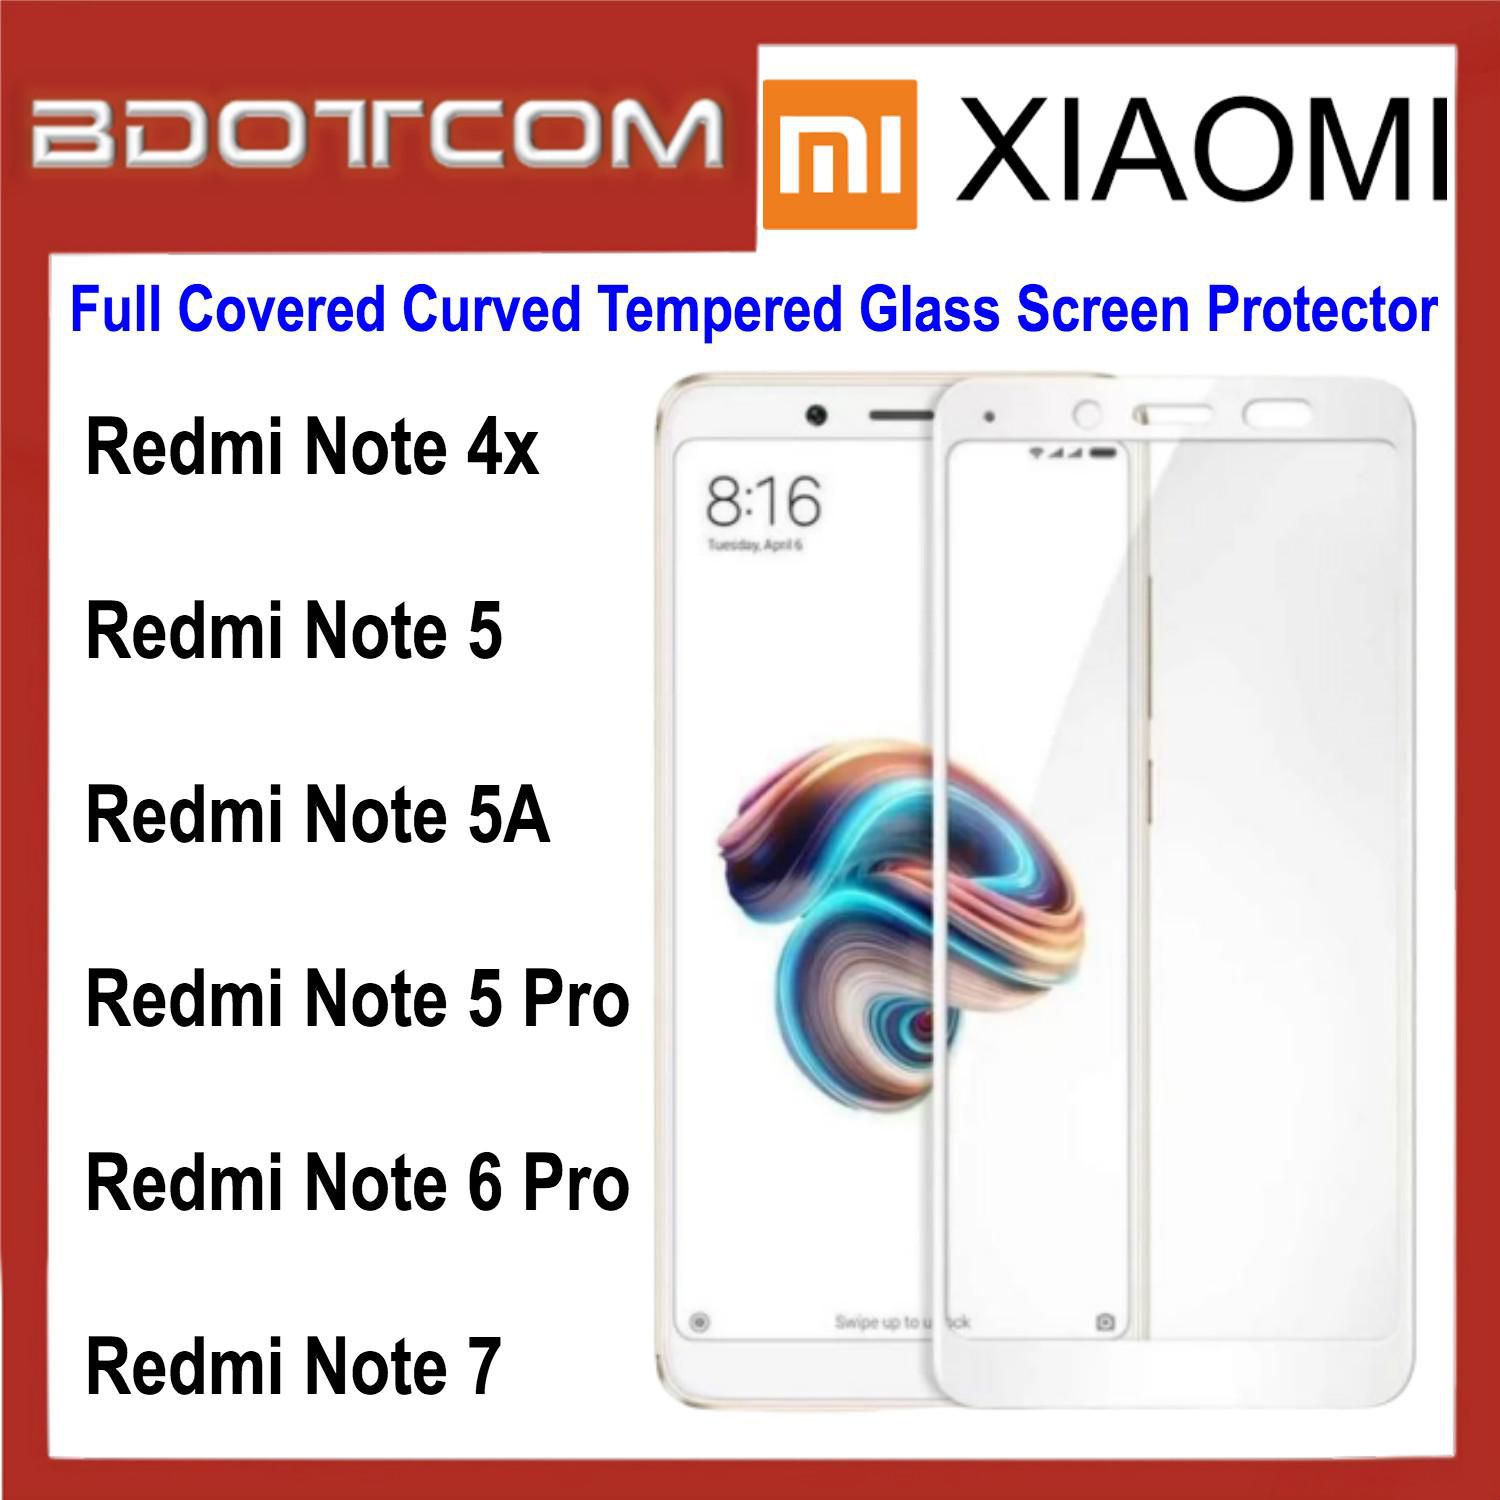 Bdotcom Full Covered Curved Tempered Glass Screen Protector for Xiaomi Redmi Note 4X  (White)